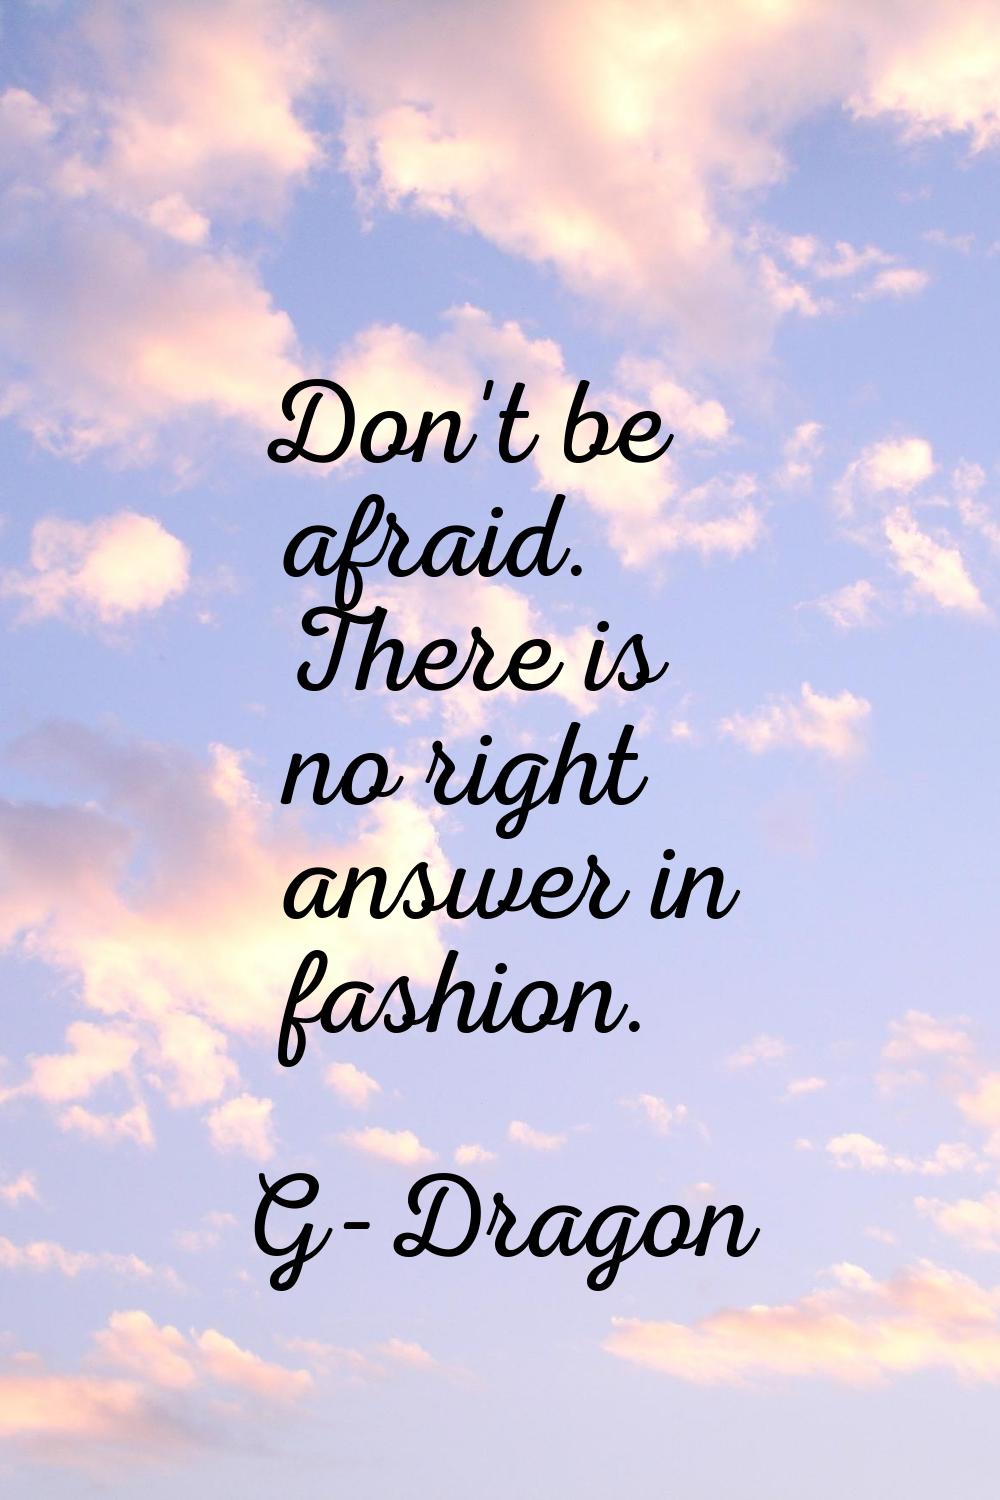 Don't be afraid. There is no right answer in fashion.